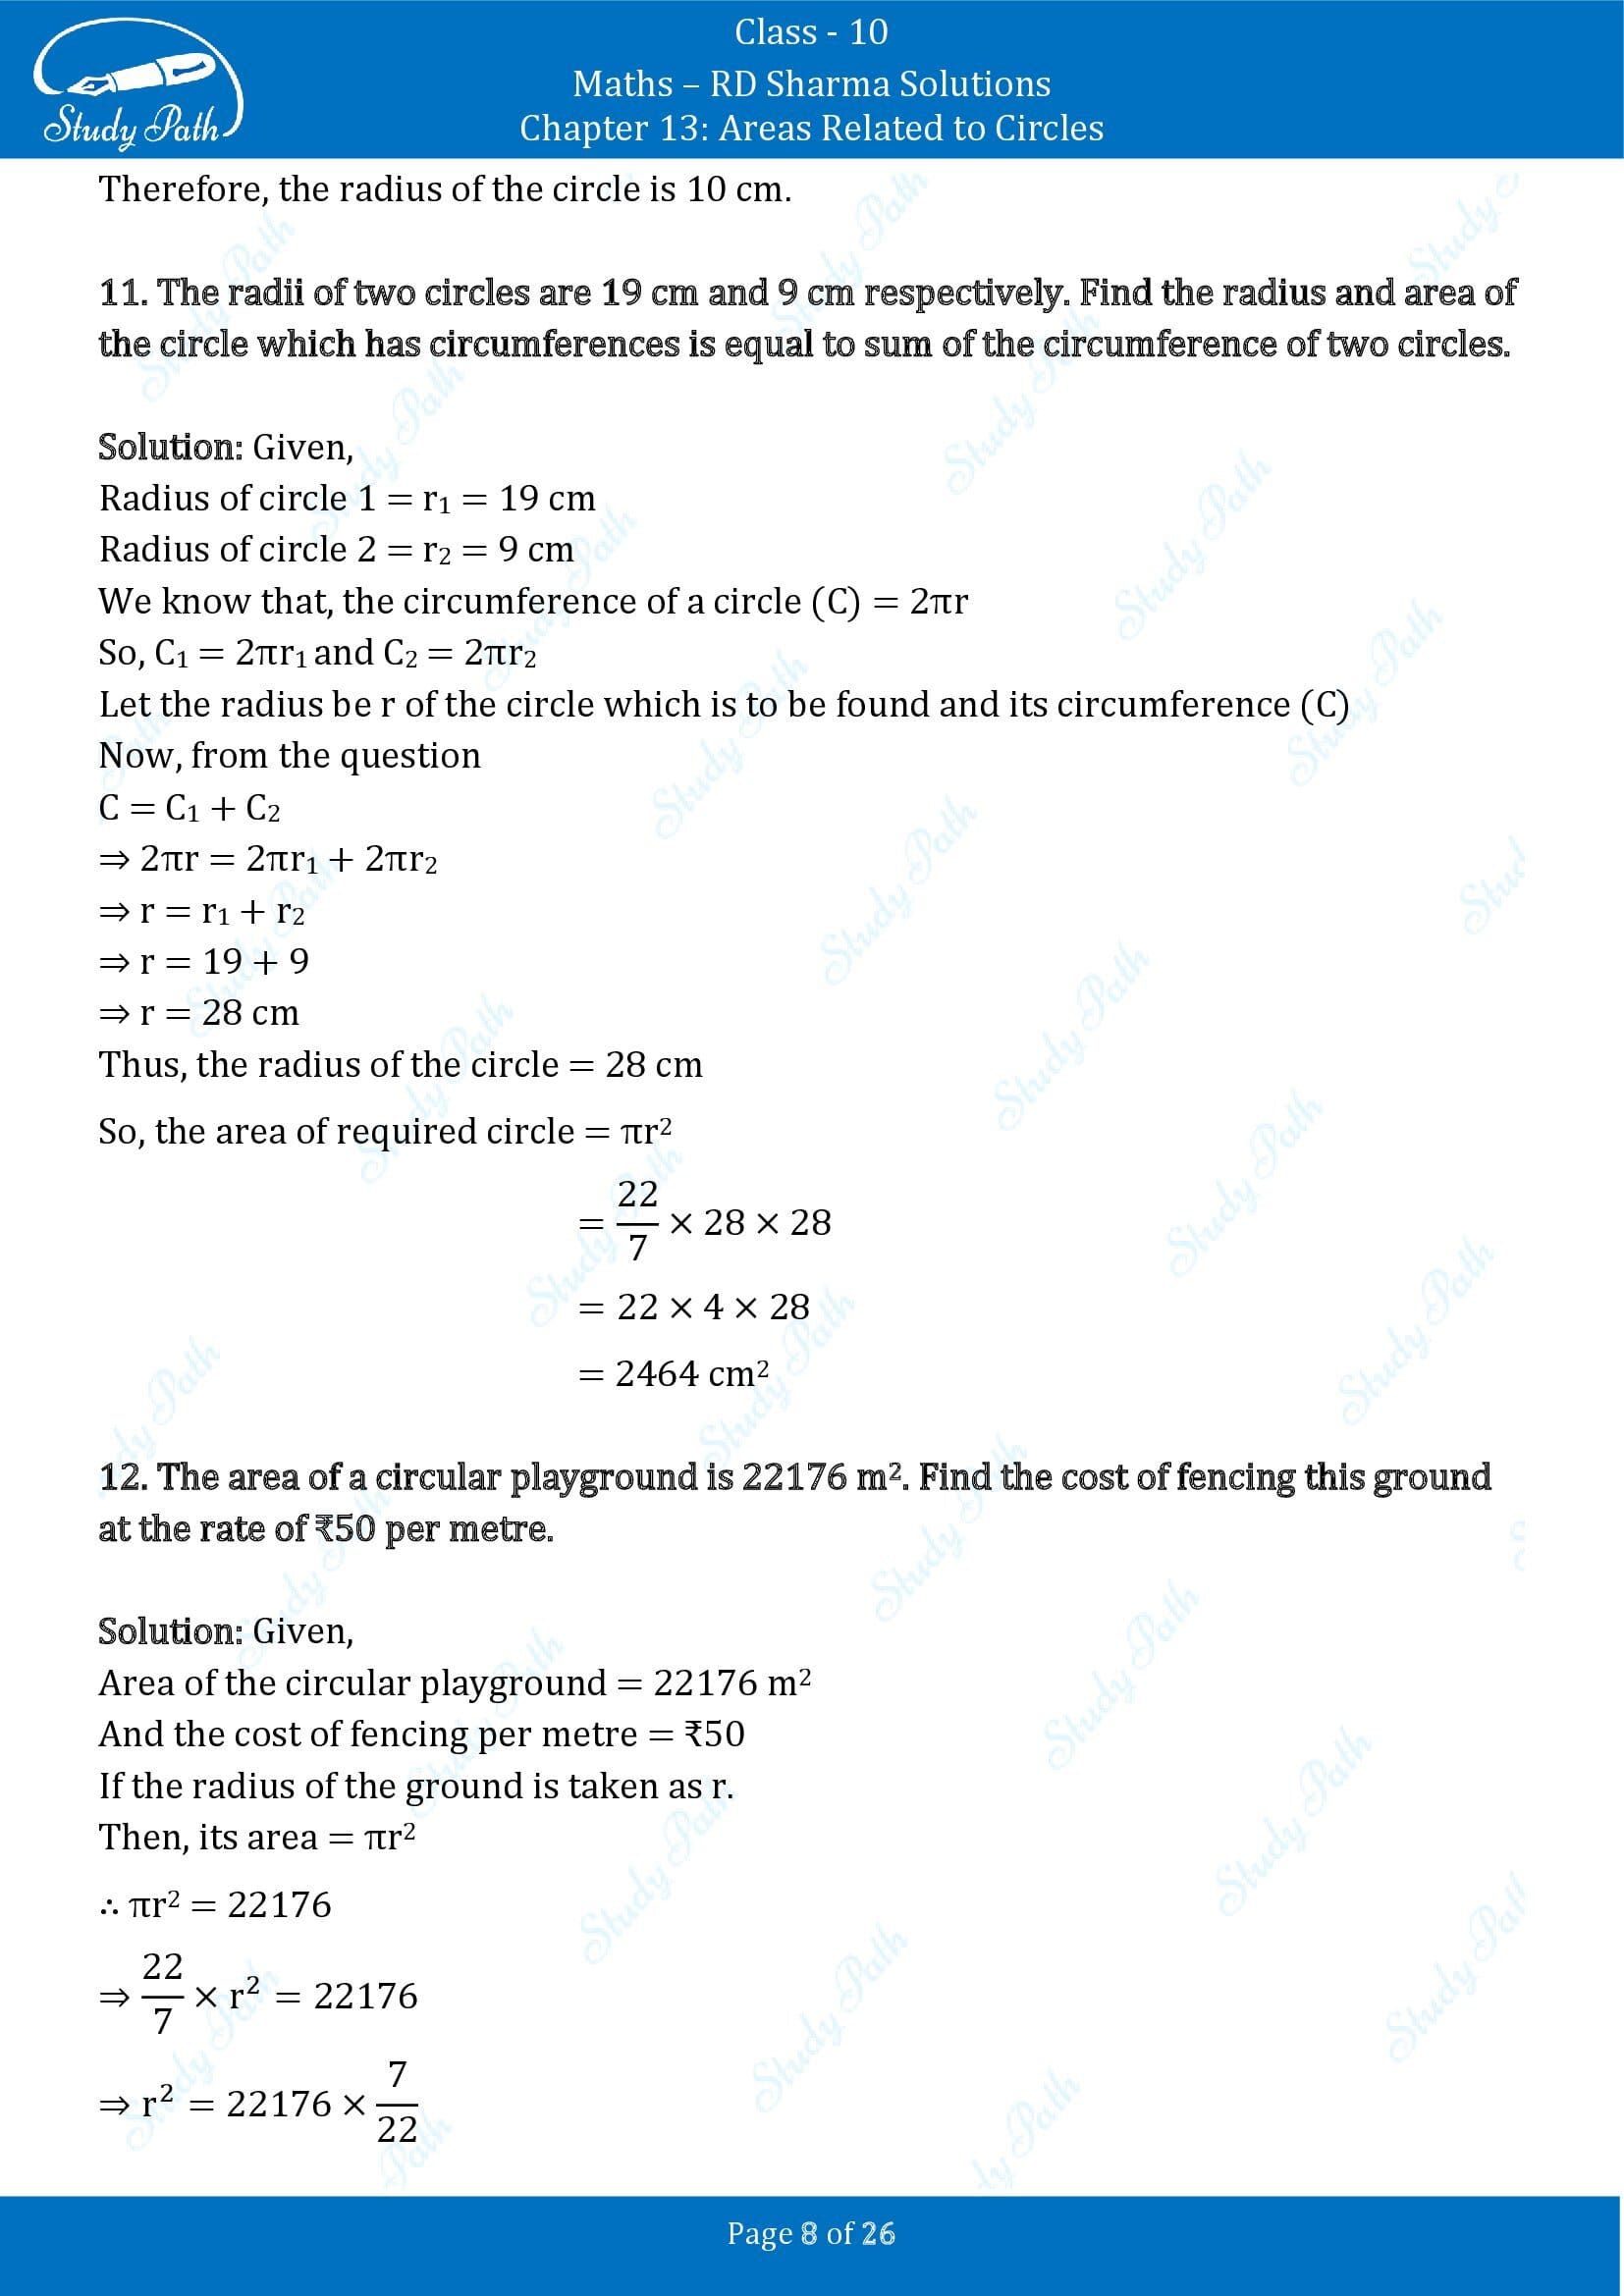 RD Sharma Solutions Class 10 Chapter 13 Areas Related to Circles Exercise 13.1 00008